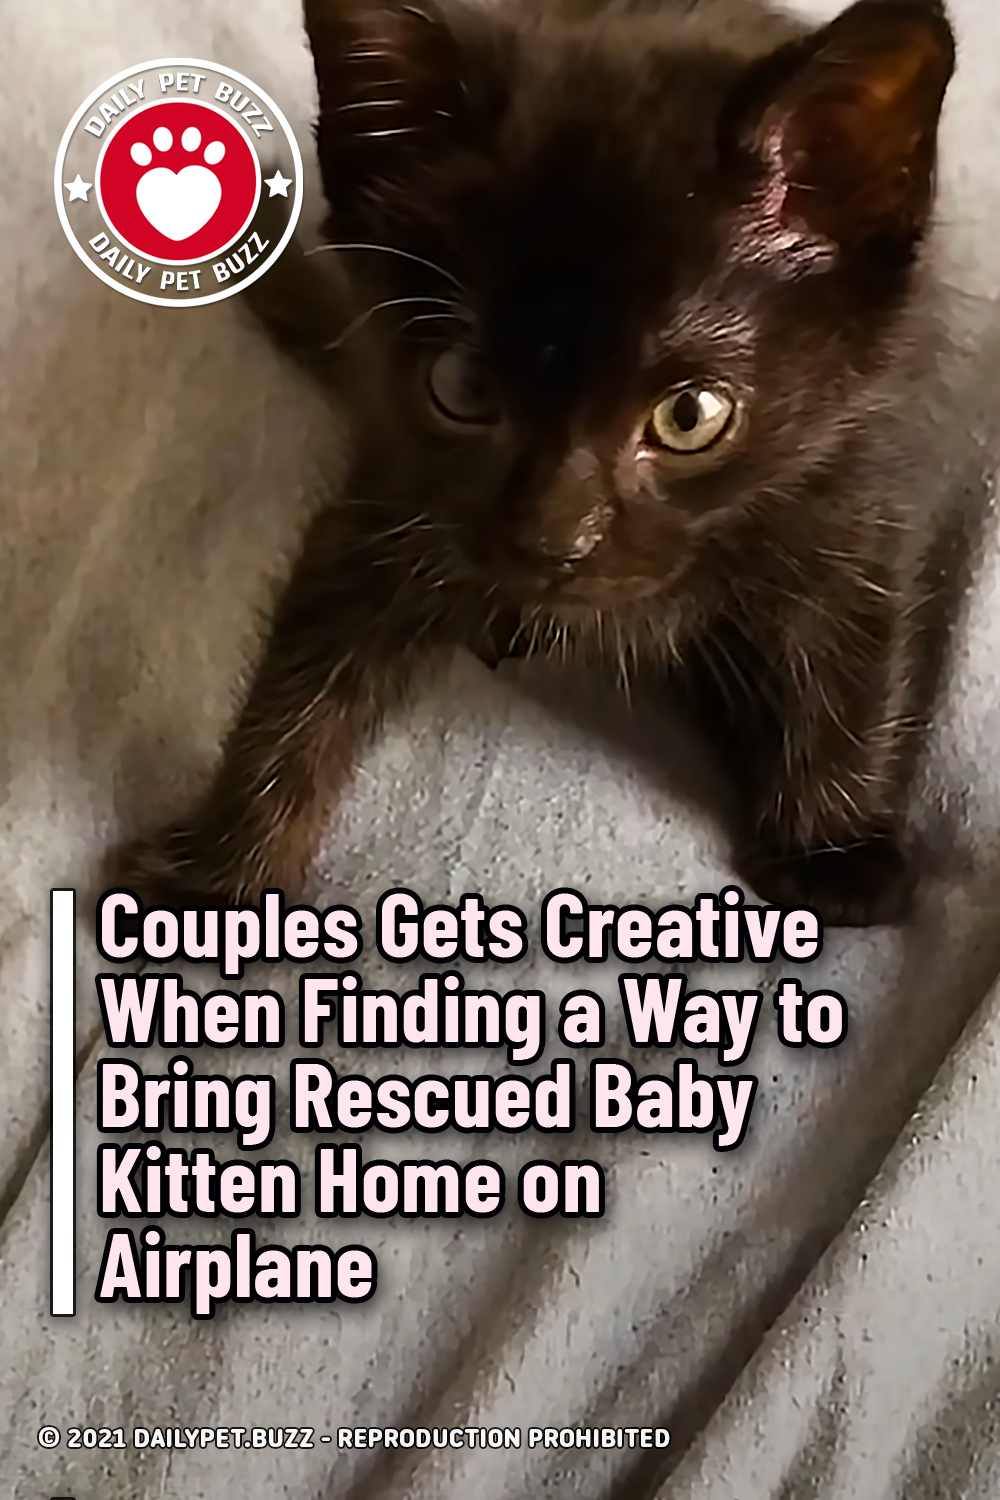 Couple Gets Creative When Finding a Way to Bring Rescued Baby Kitten Home on Airplane